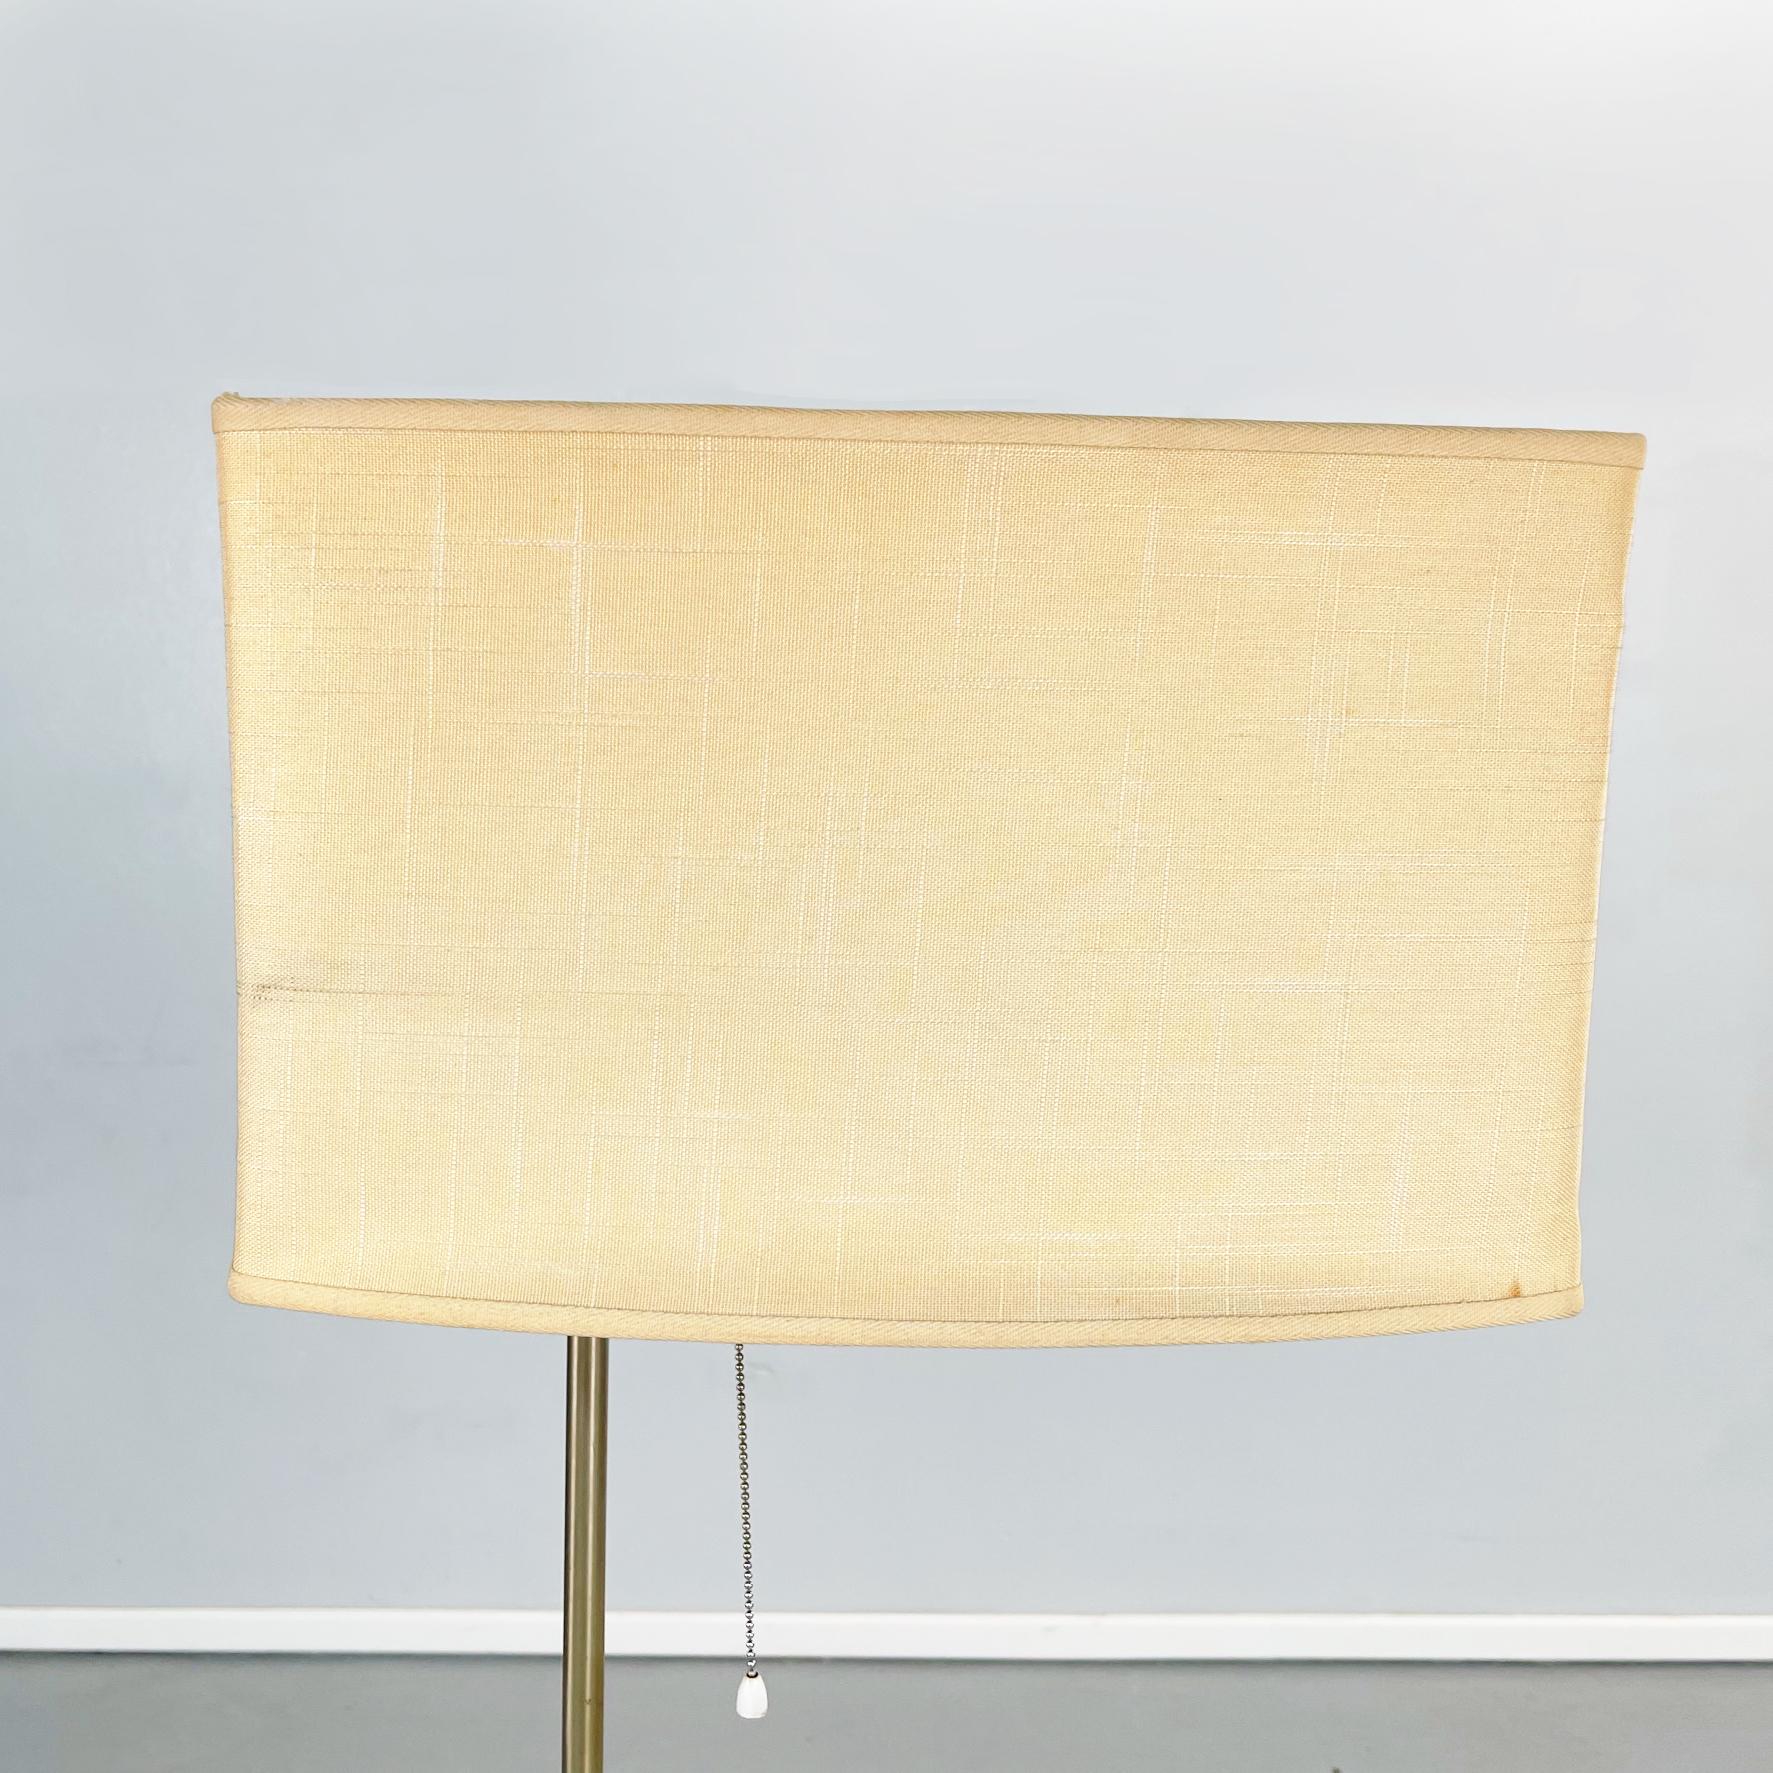 Late 20th Century Italian Mid-Century Floor Lamp in Fabric, Leather and Brass by Stilnovo, 1970s For Sale